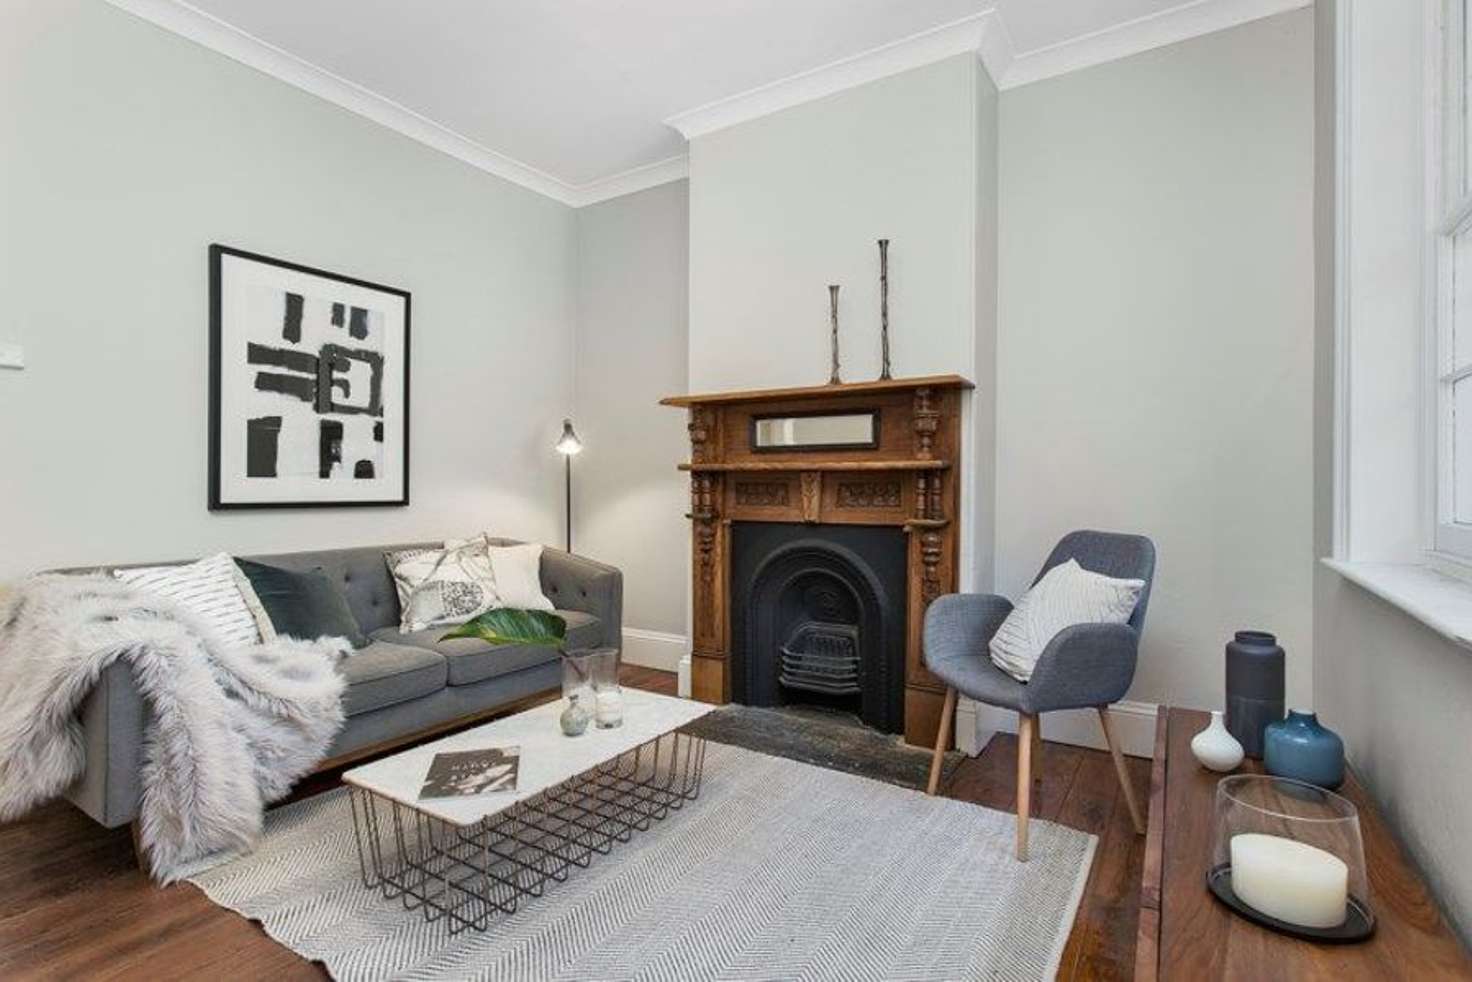 Main view of Homely house listing, 11 Belvoir St, Surry Hills NSW 2010